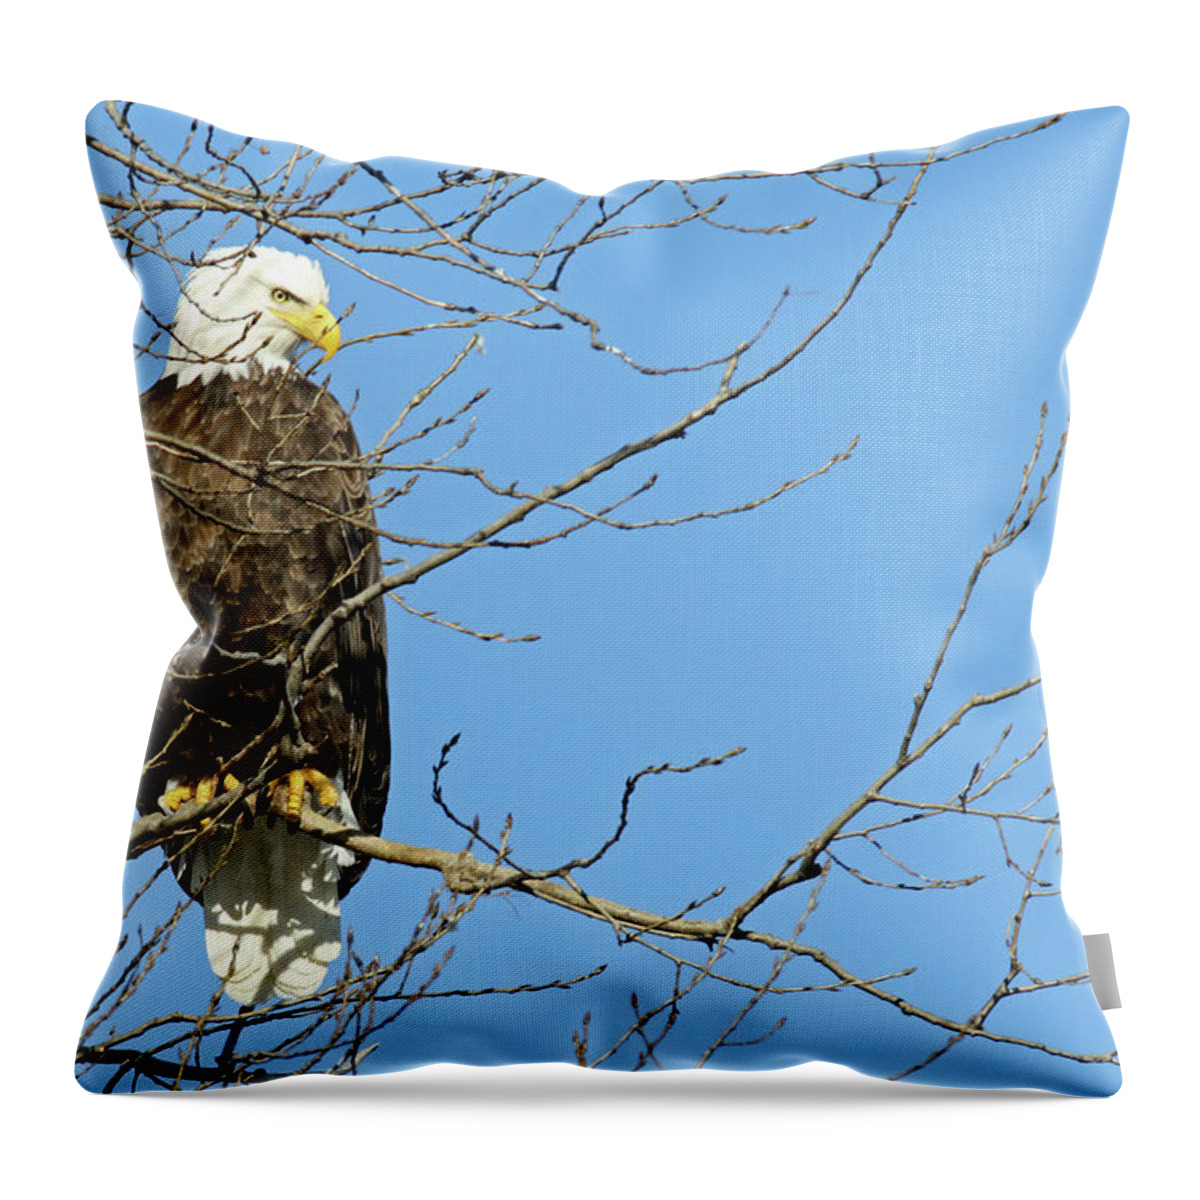 Eagle Throw Pillow featuring the photograph Eagle by Brook Burling